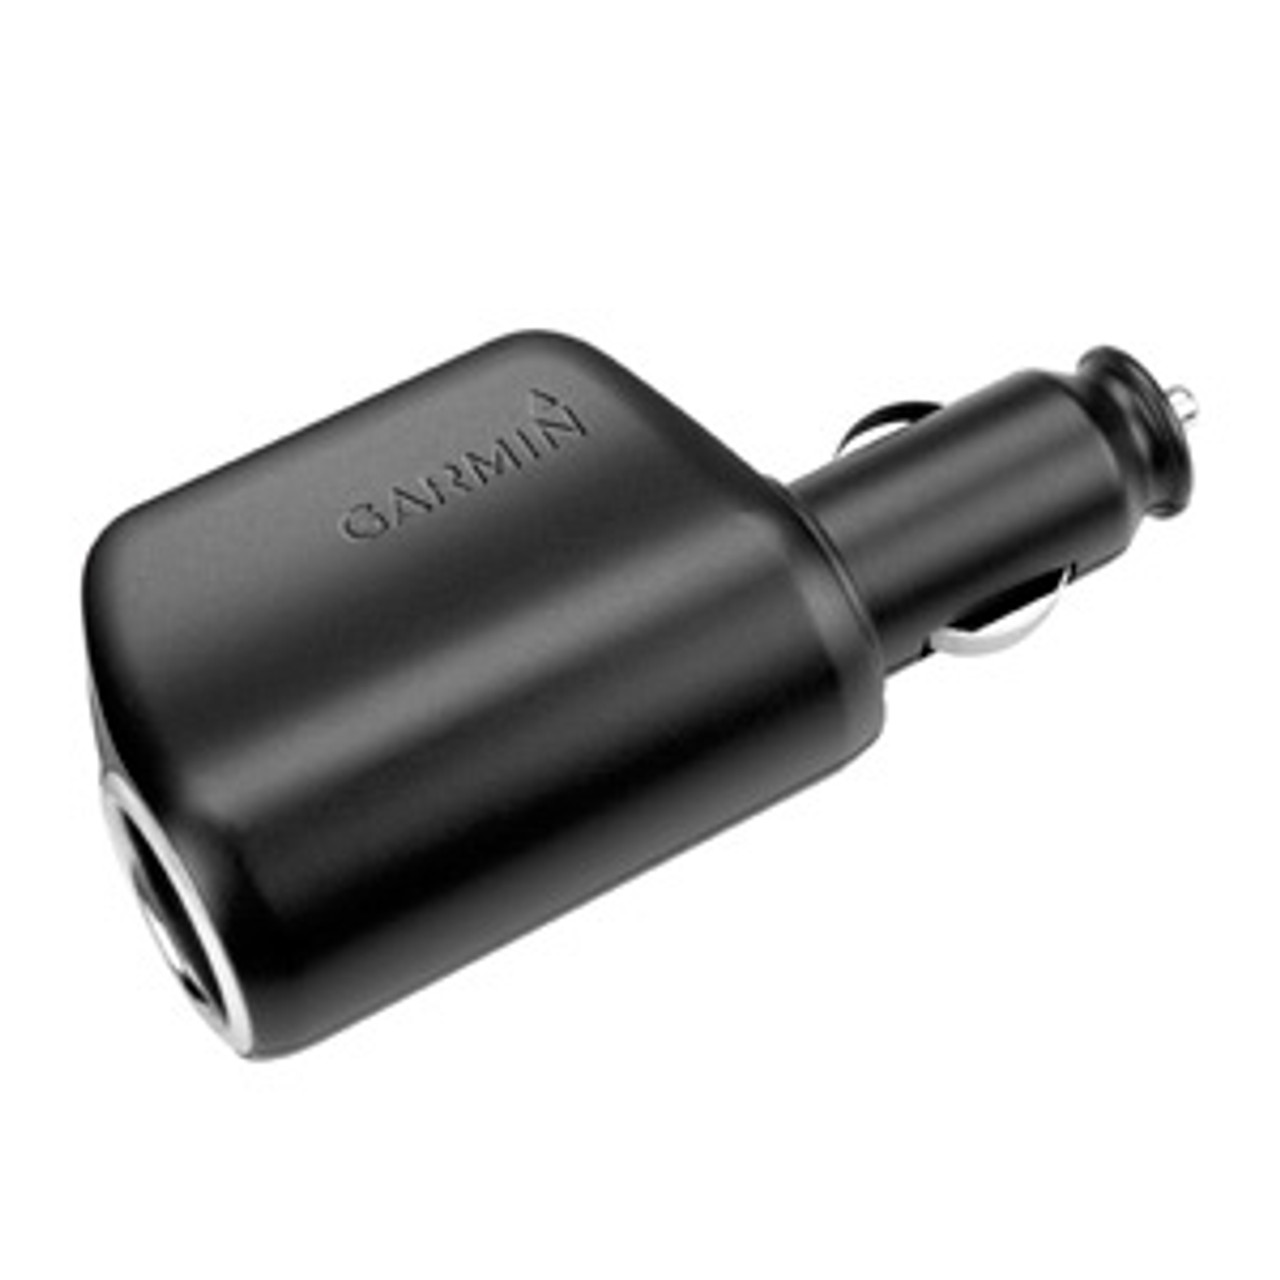 garmin car charger with multi usb ports